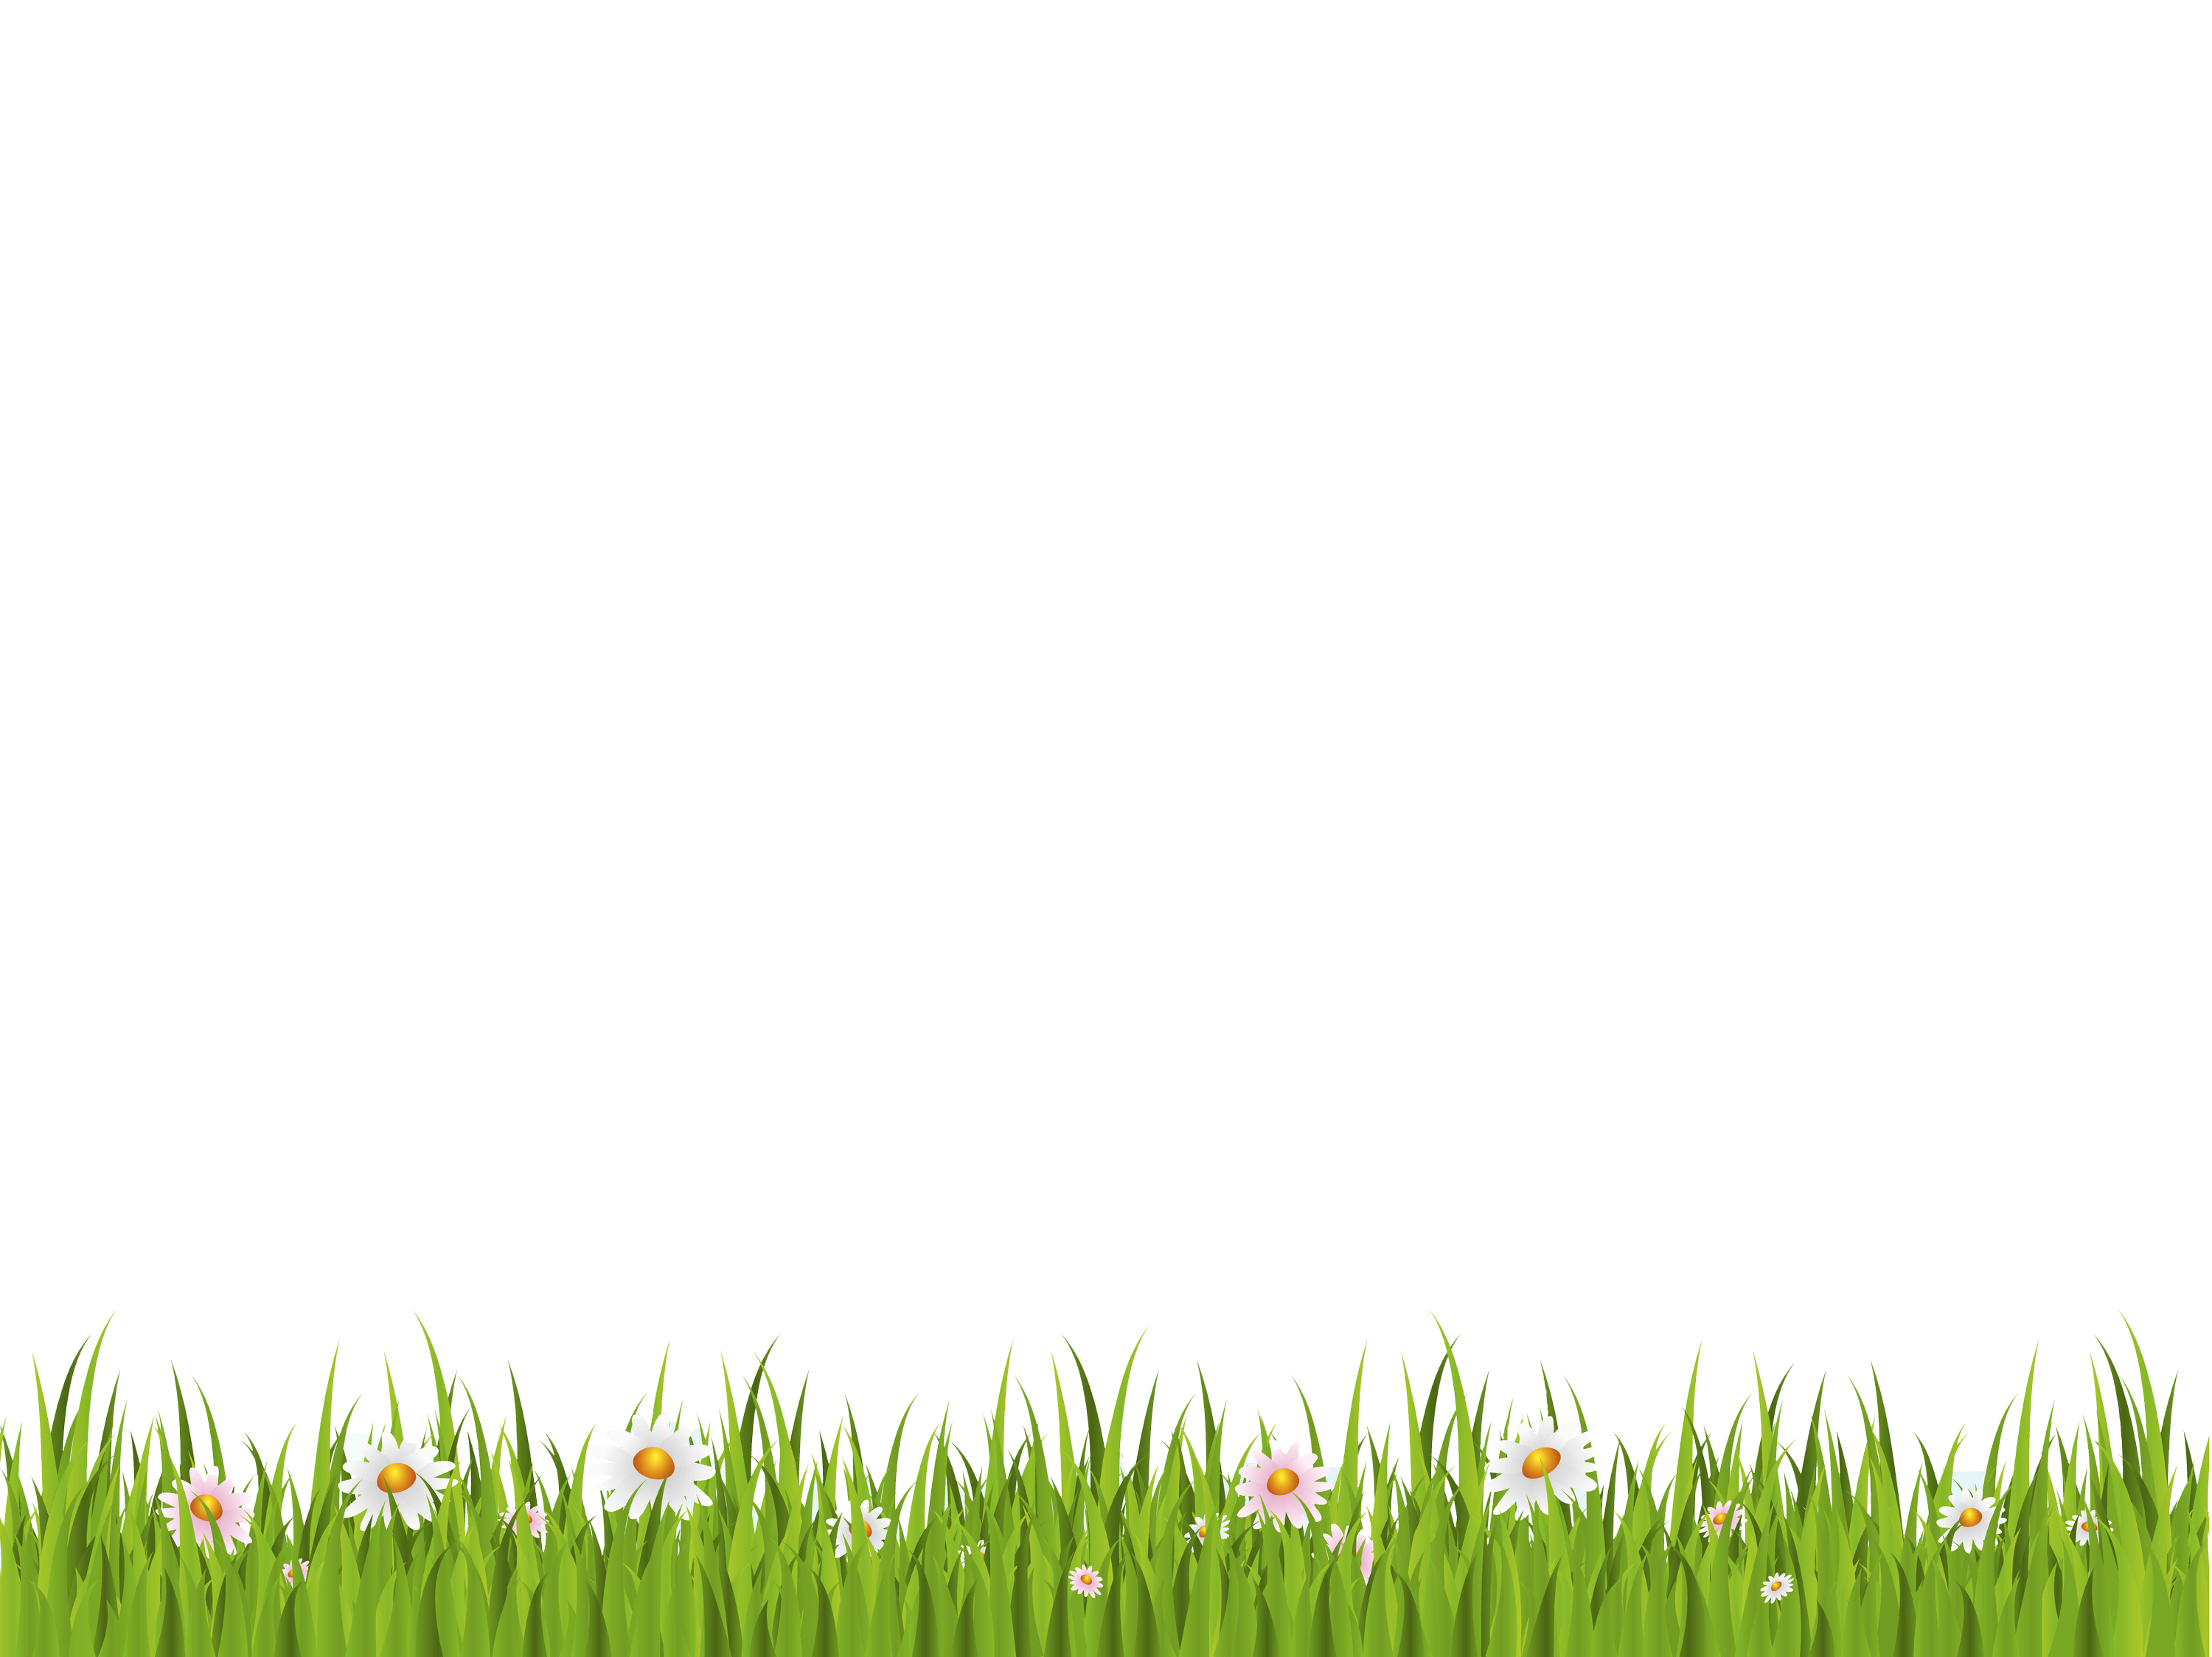 Grass PNG Transparent Images PNG All